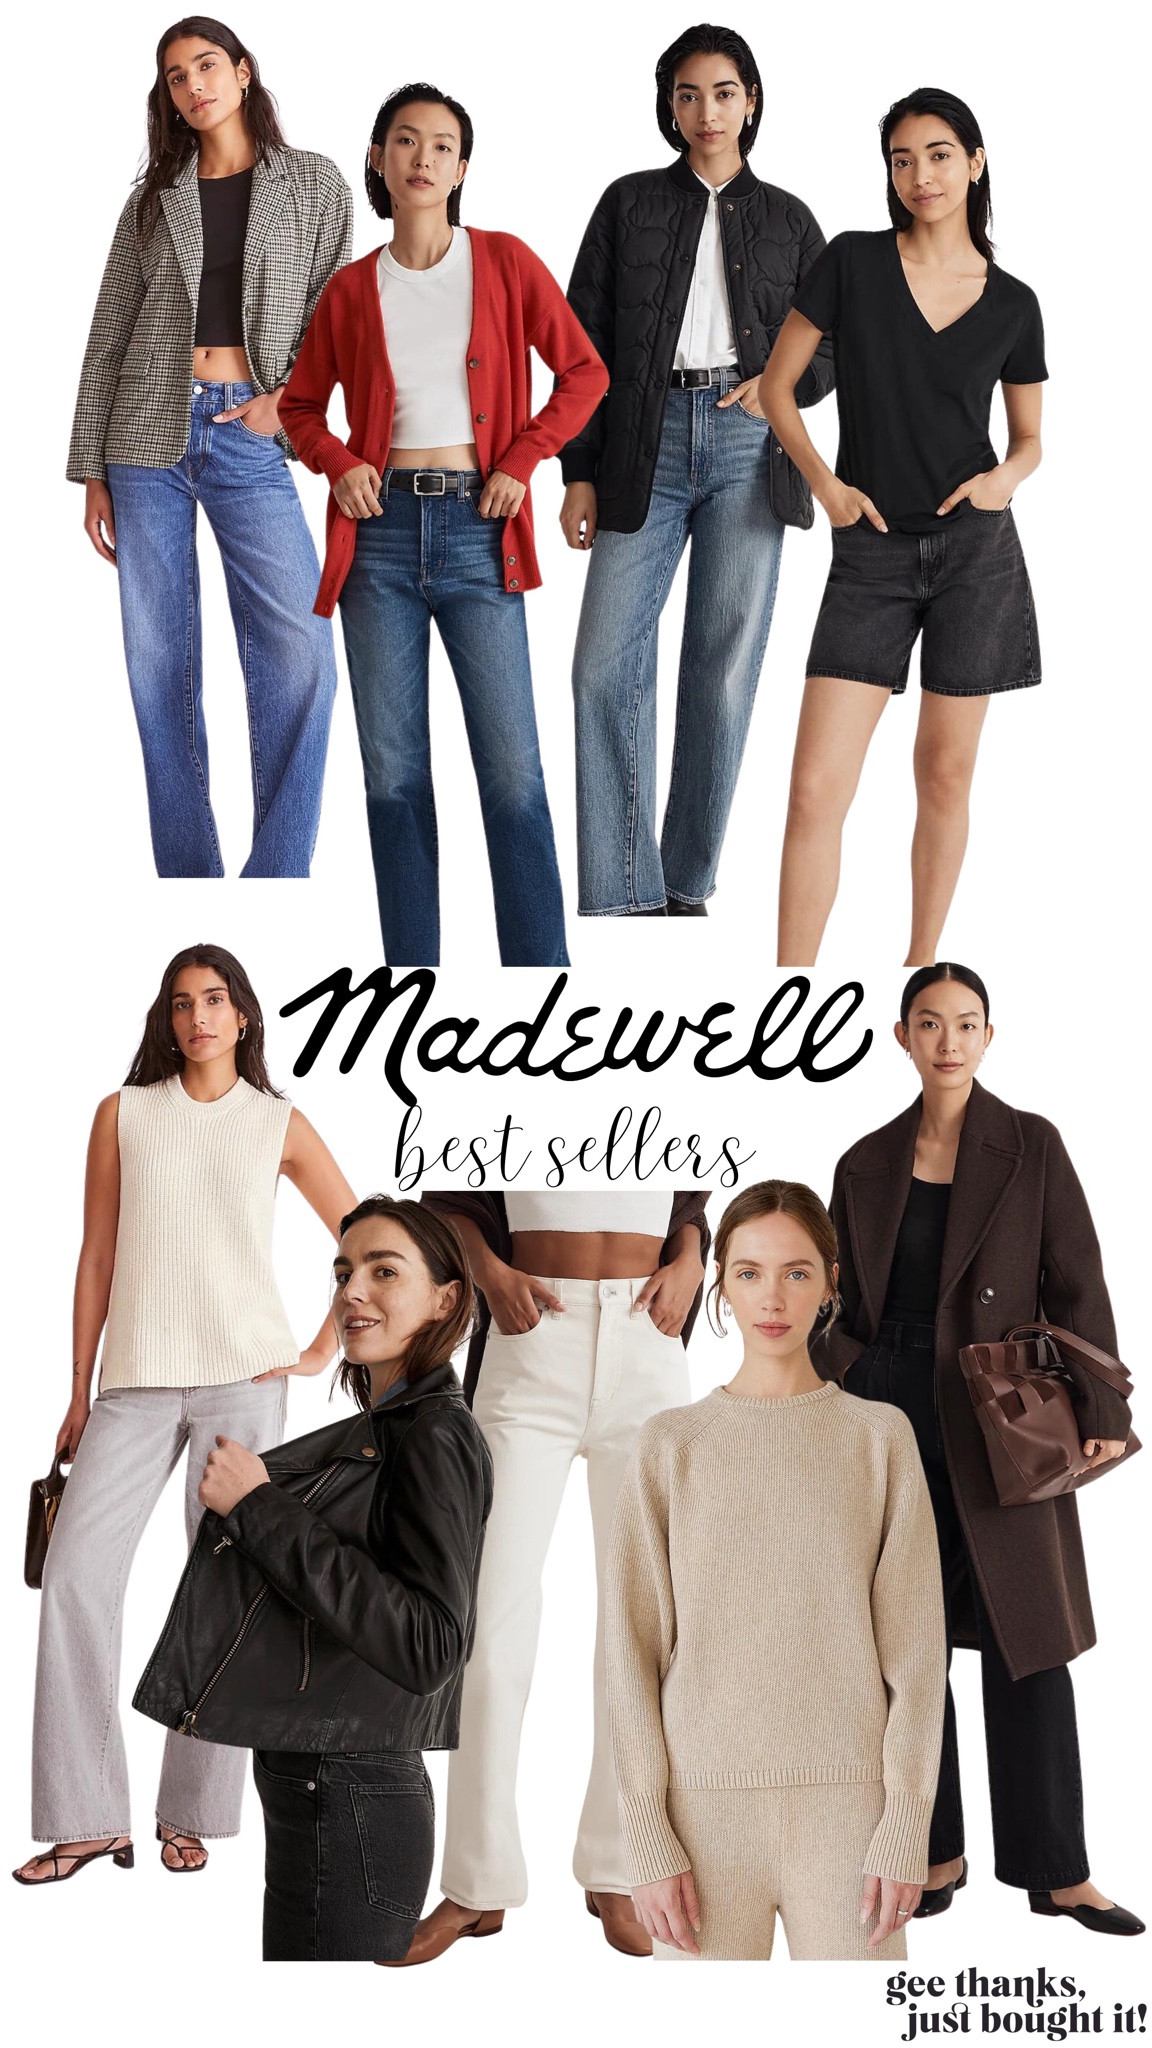 Madewell sale: Save 25% on jeans and fall fashion essentials